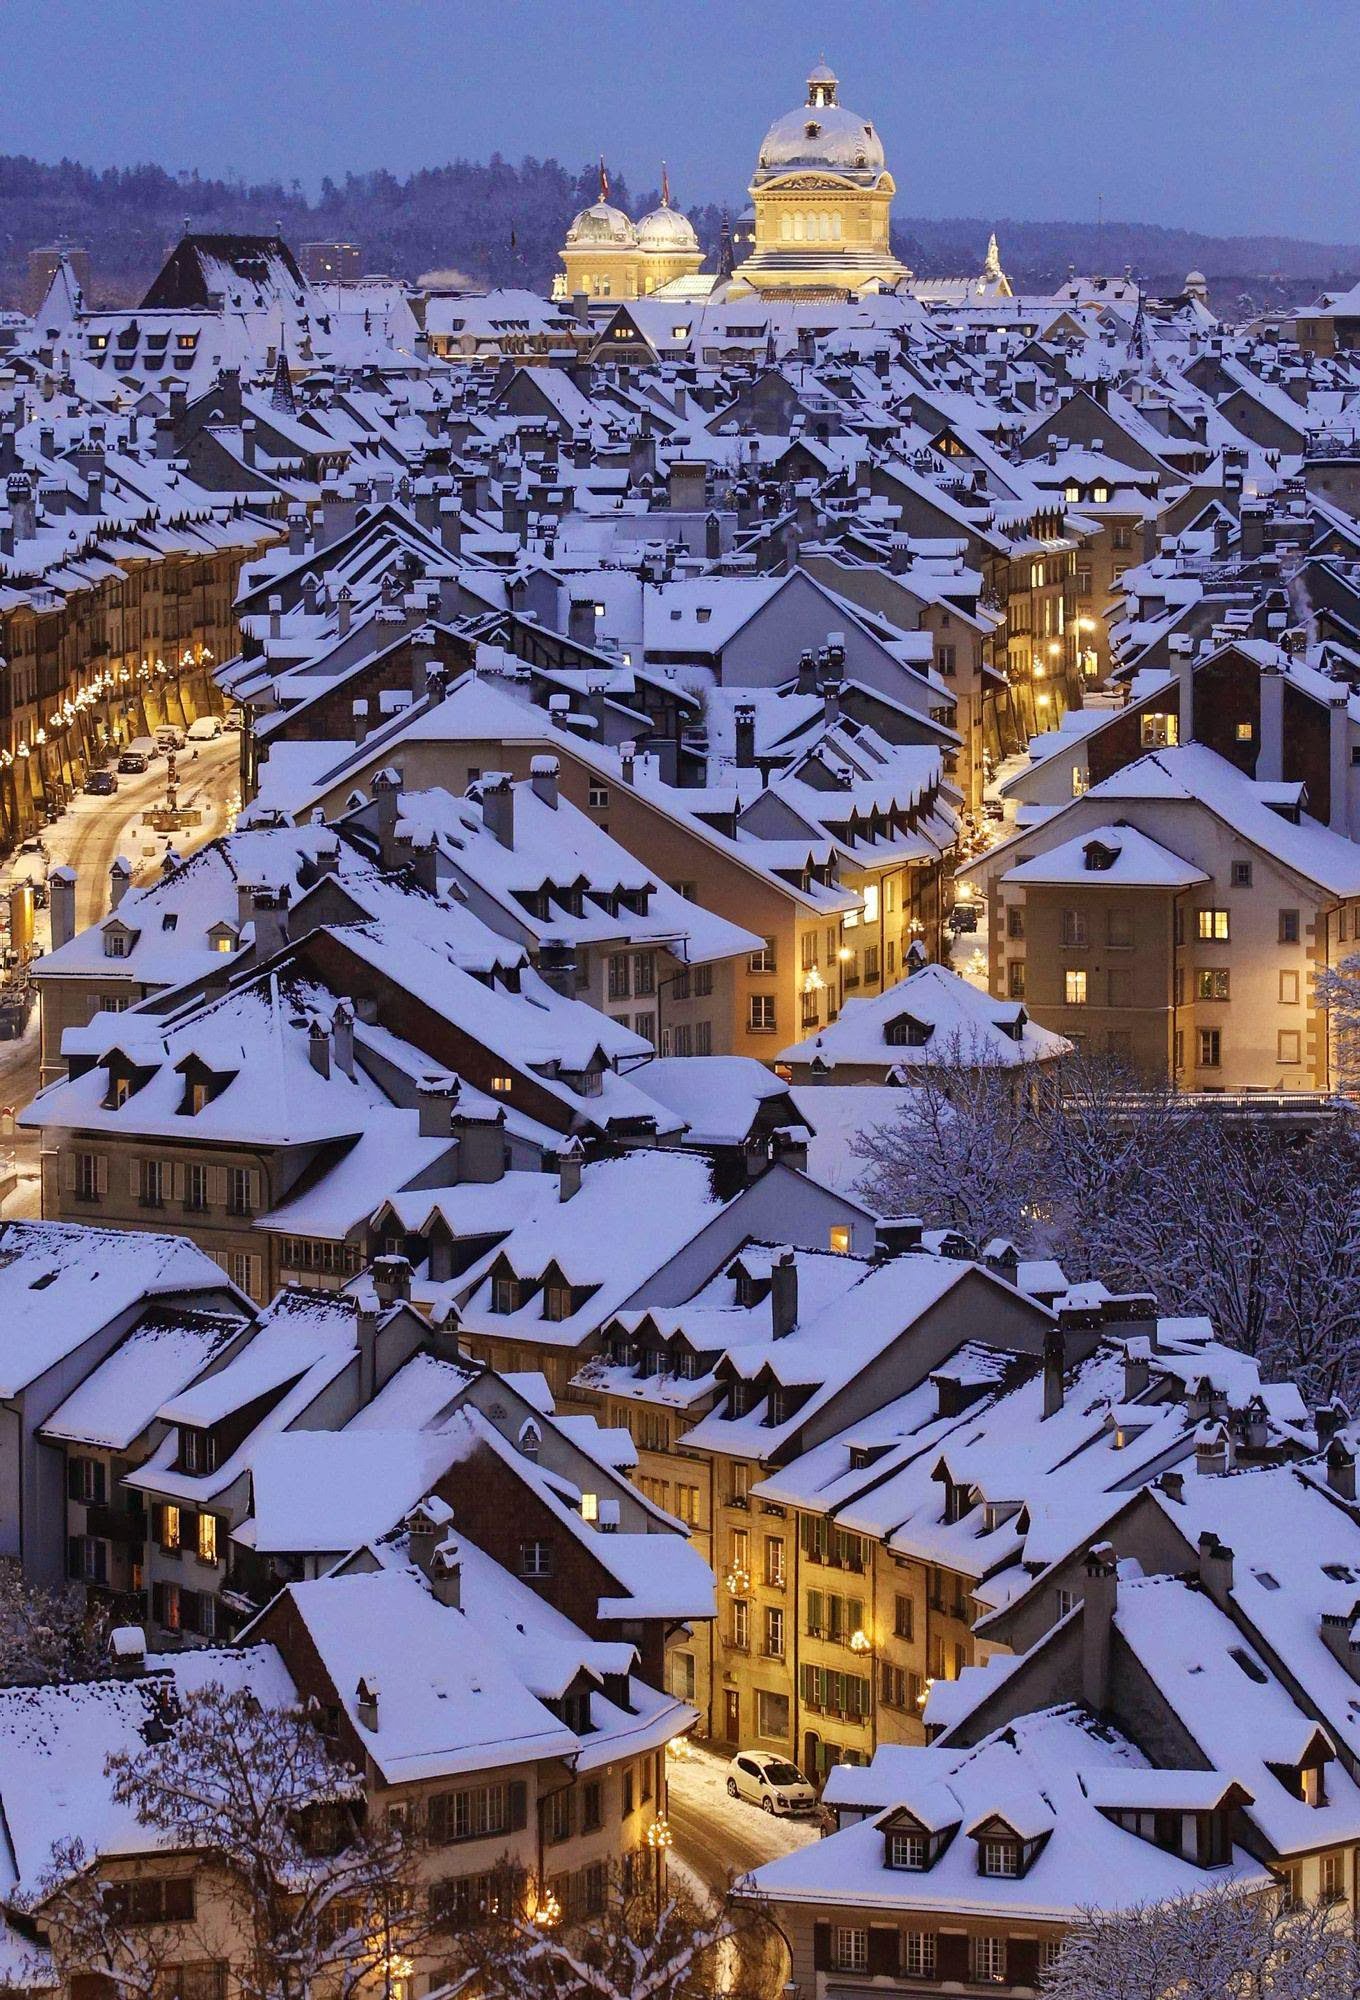 AD-Awesome-Image-of-Winter-in-Bern-Switzerland